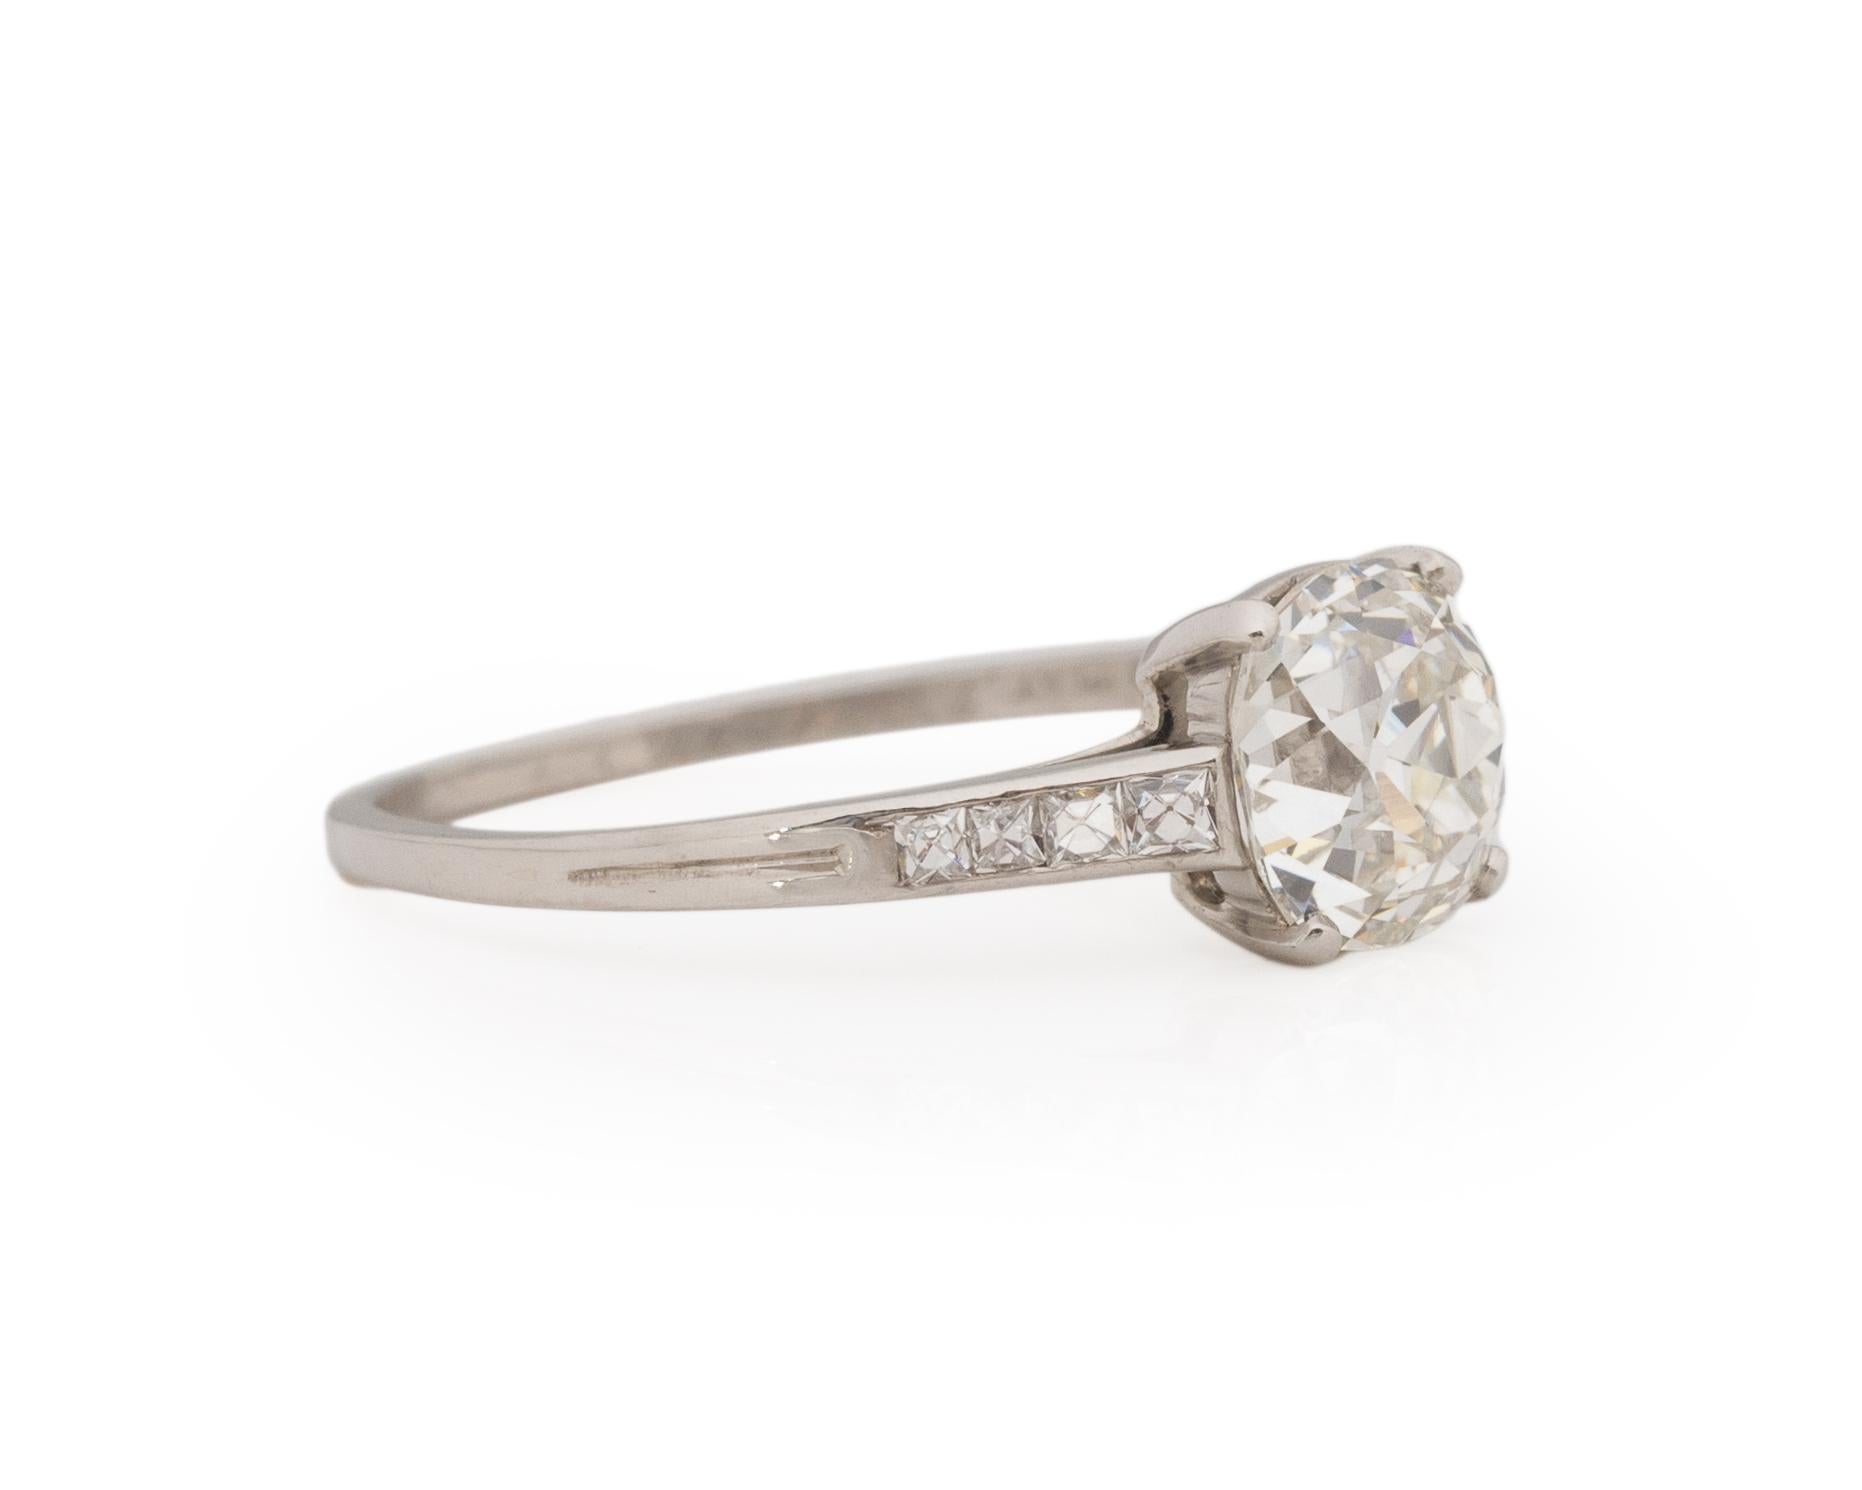 Ring Size: 7.25
Metal Type: Platinum [Hallmarked, and Tested]
Weight: 3.0 grams

Diamond Details:
GIA REPORT #:6224451244
Weight: 1.68ct
Cut: Old Mine Brilliant ( Antique Cushion )
Color: I
Clarity: VS2
Measurements: 7.14mm x 6.98mm x 4.89mm

Finger